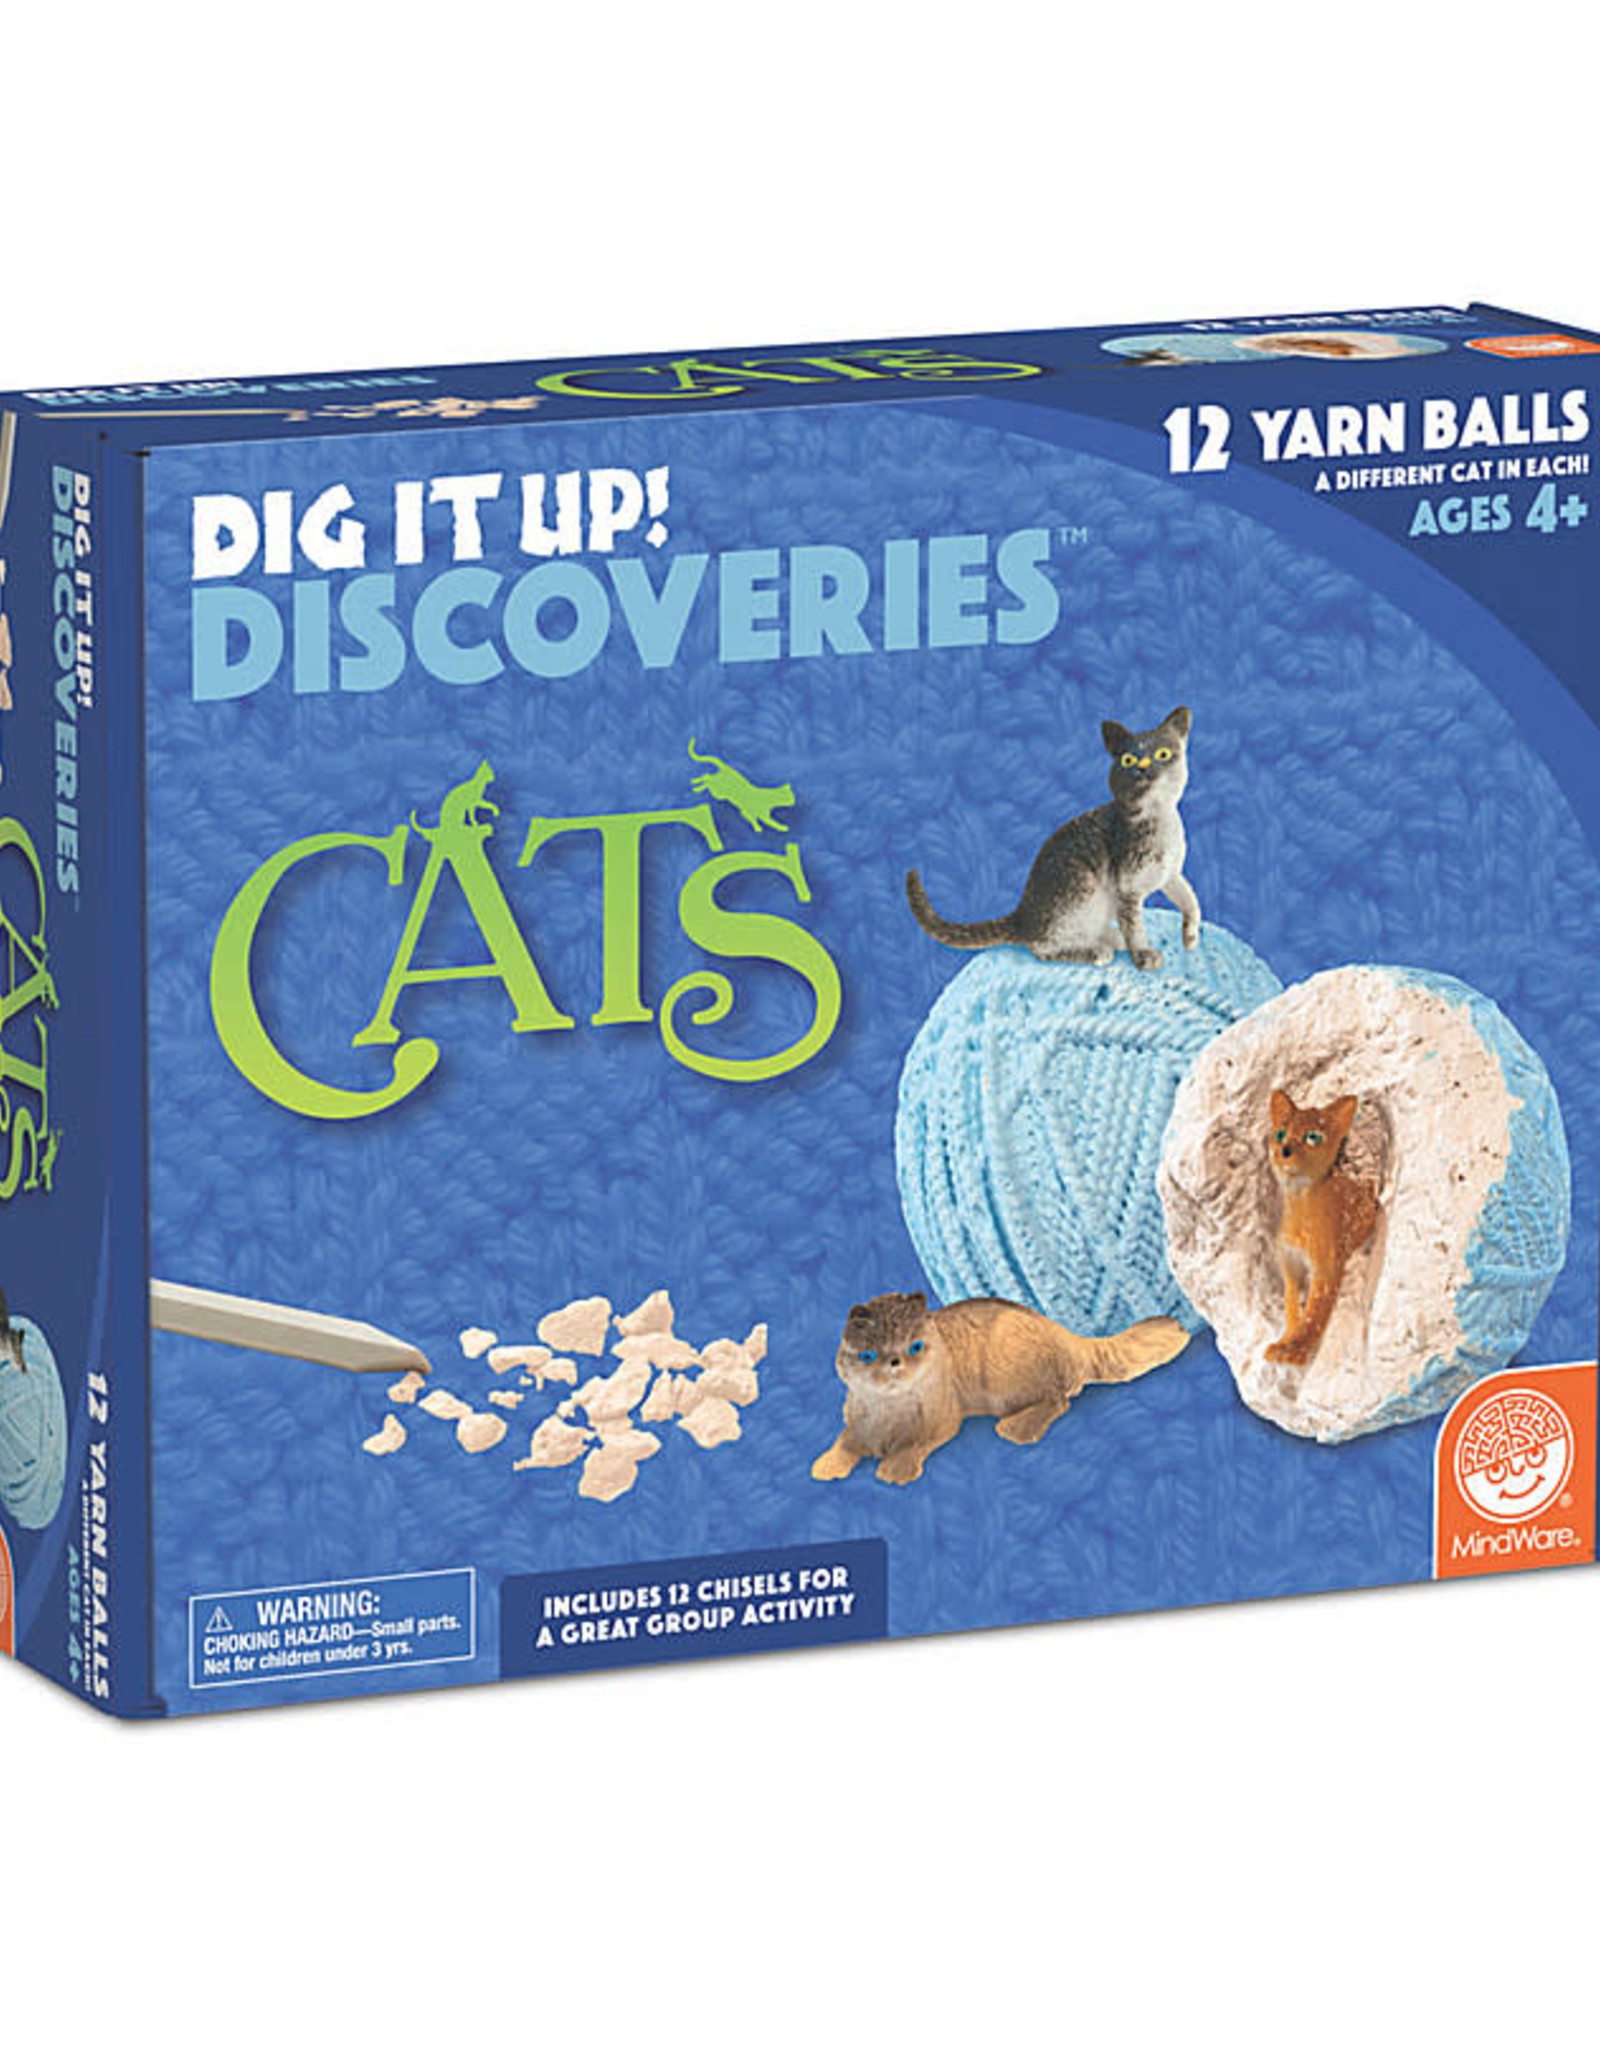 Dig it up! Discoveries: Cats